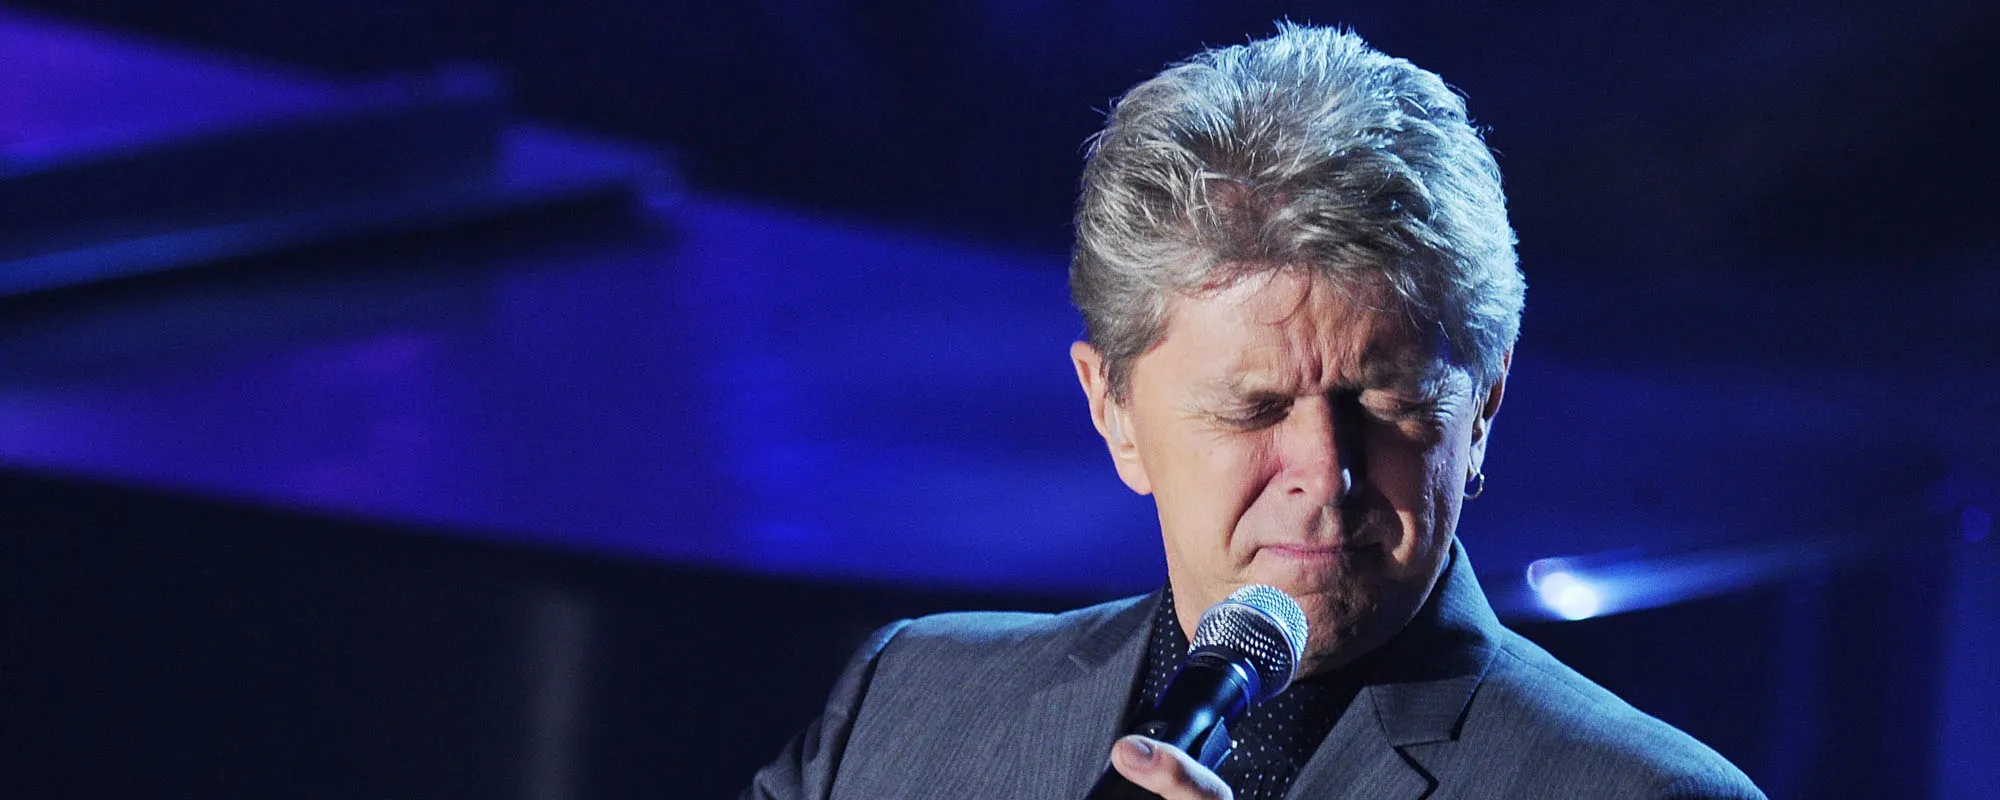 The Meaning Behind “Glory of Love” by Peter Cetera and Why It Was so Important to His Budding Solo Career